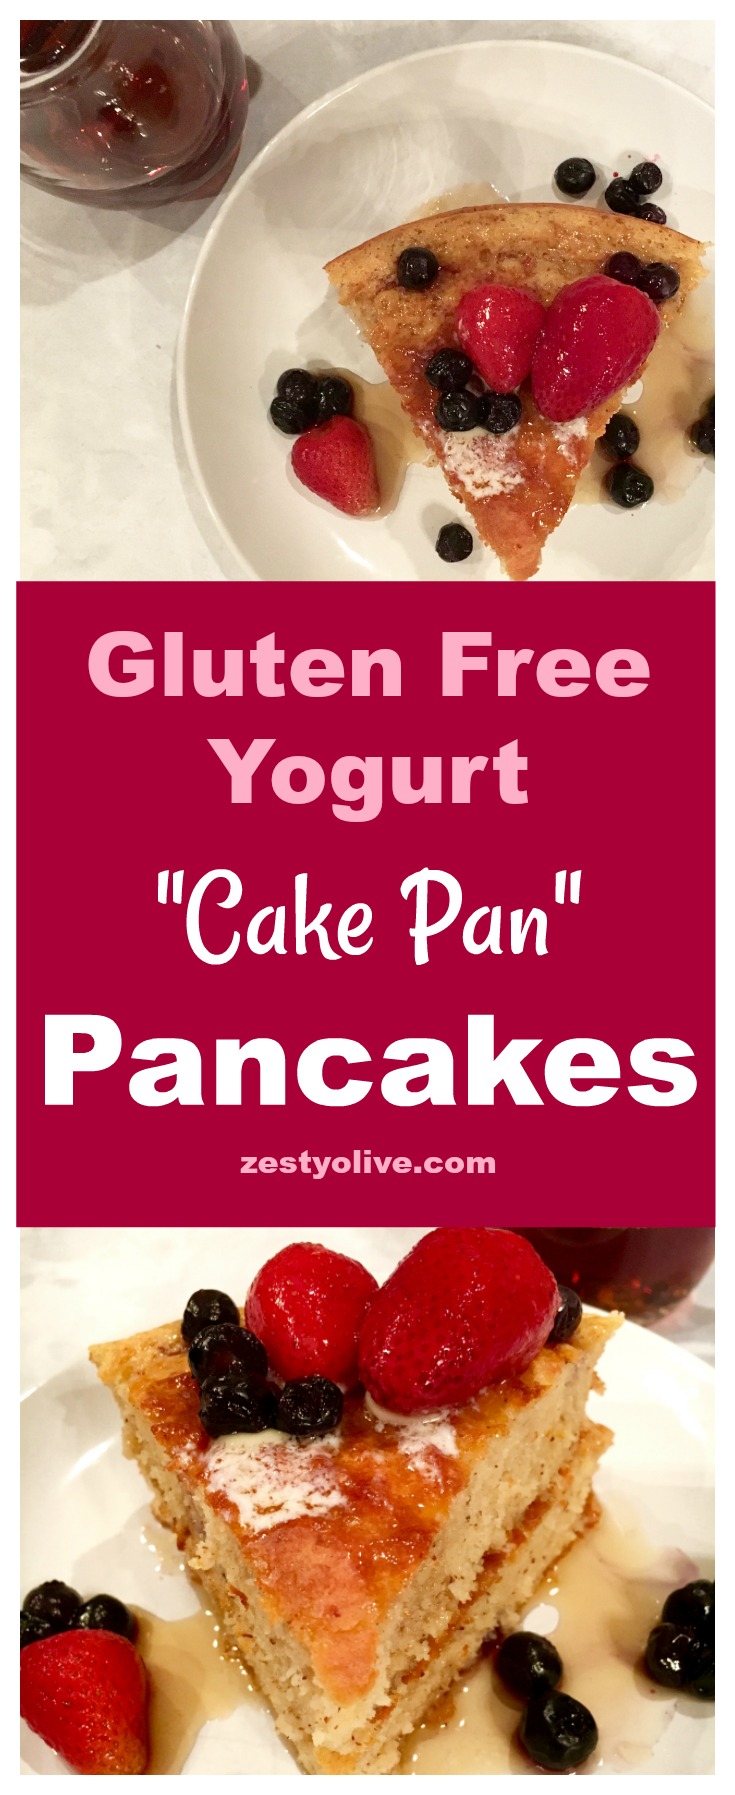 Don't want to stand over a hot griddle flipping and waiting for your pancakes? Try my simple oven bake method and give these healthy Gluten Free Yogurt Cake Pan Pancakes a try today. This is possibly the easiest way to make pancakes!